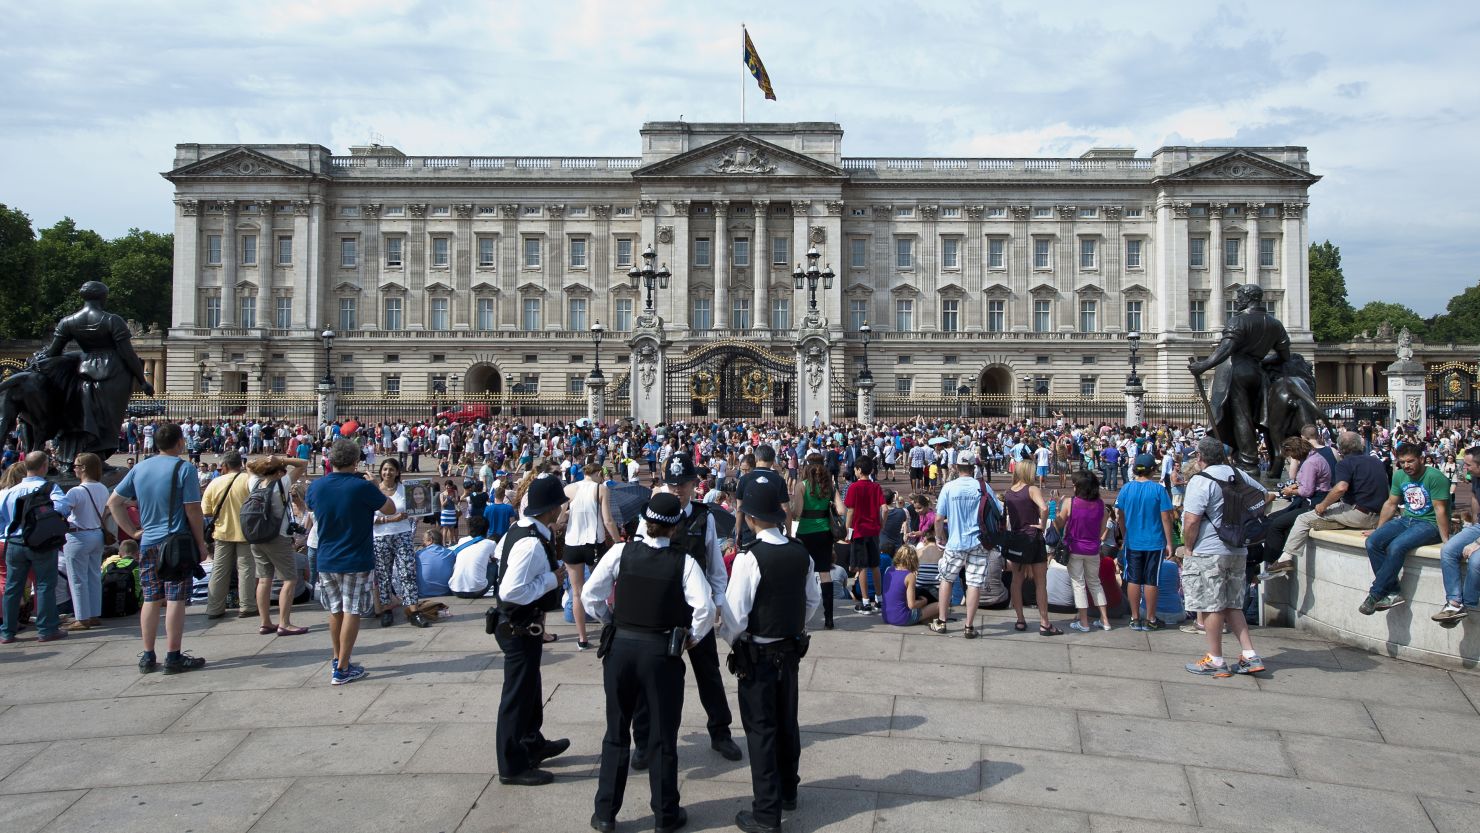 Members of the public and tourists gather outside Buckingham Palace in London in July.